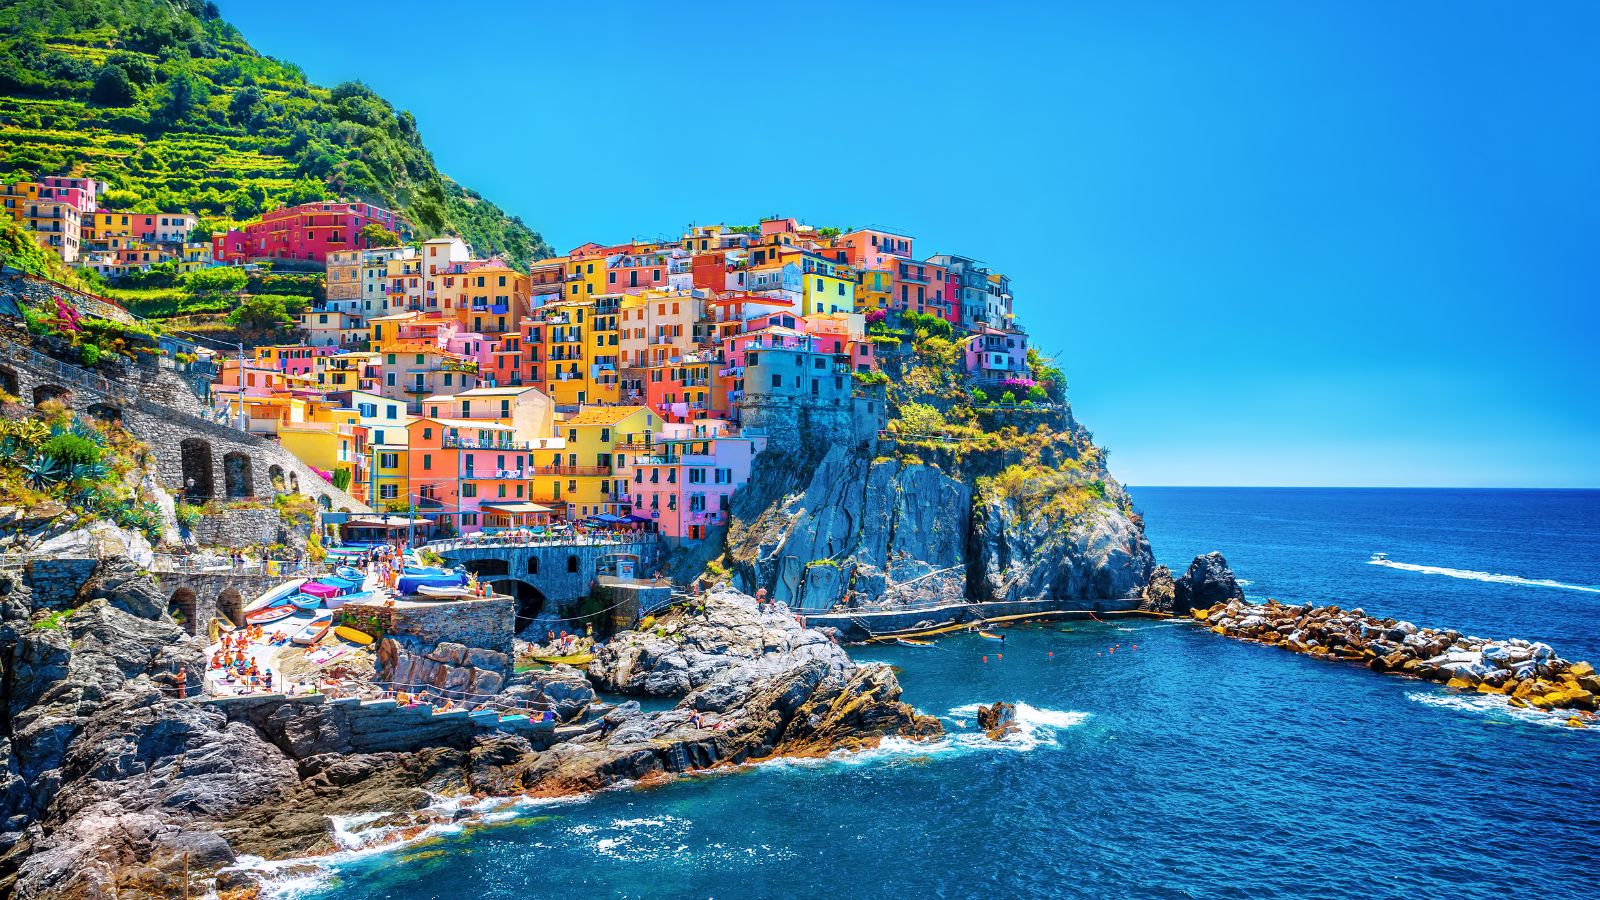 <p>You can enjoy the coastal landscapes that Cinque Terre has to offer by hiking between picturesque villages such as Vernazza and Corniglia. Cinque Terre also has delicious local cuisine to sink your teeth into, which you can eat with some spectacular views of the Mediterranean. </p>